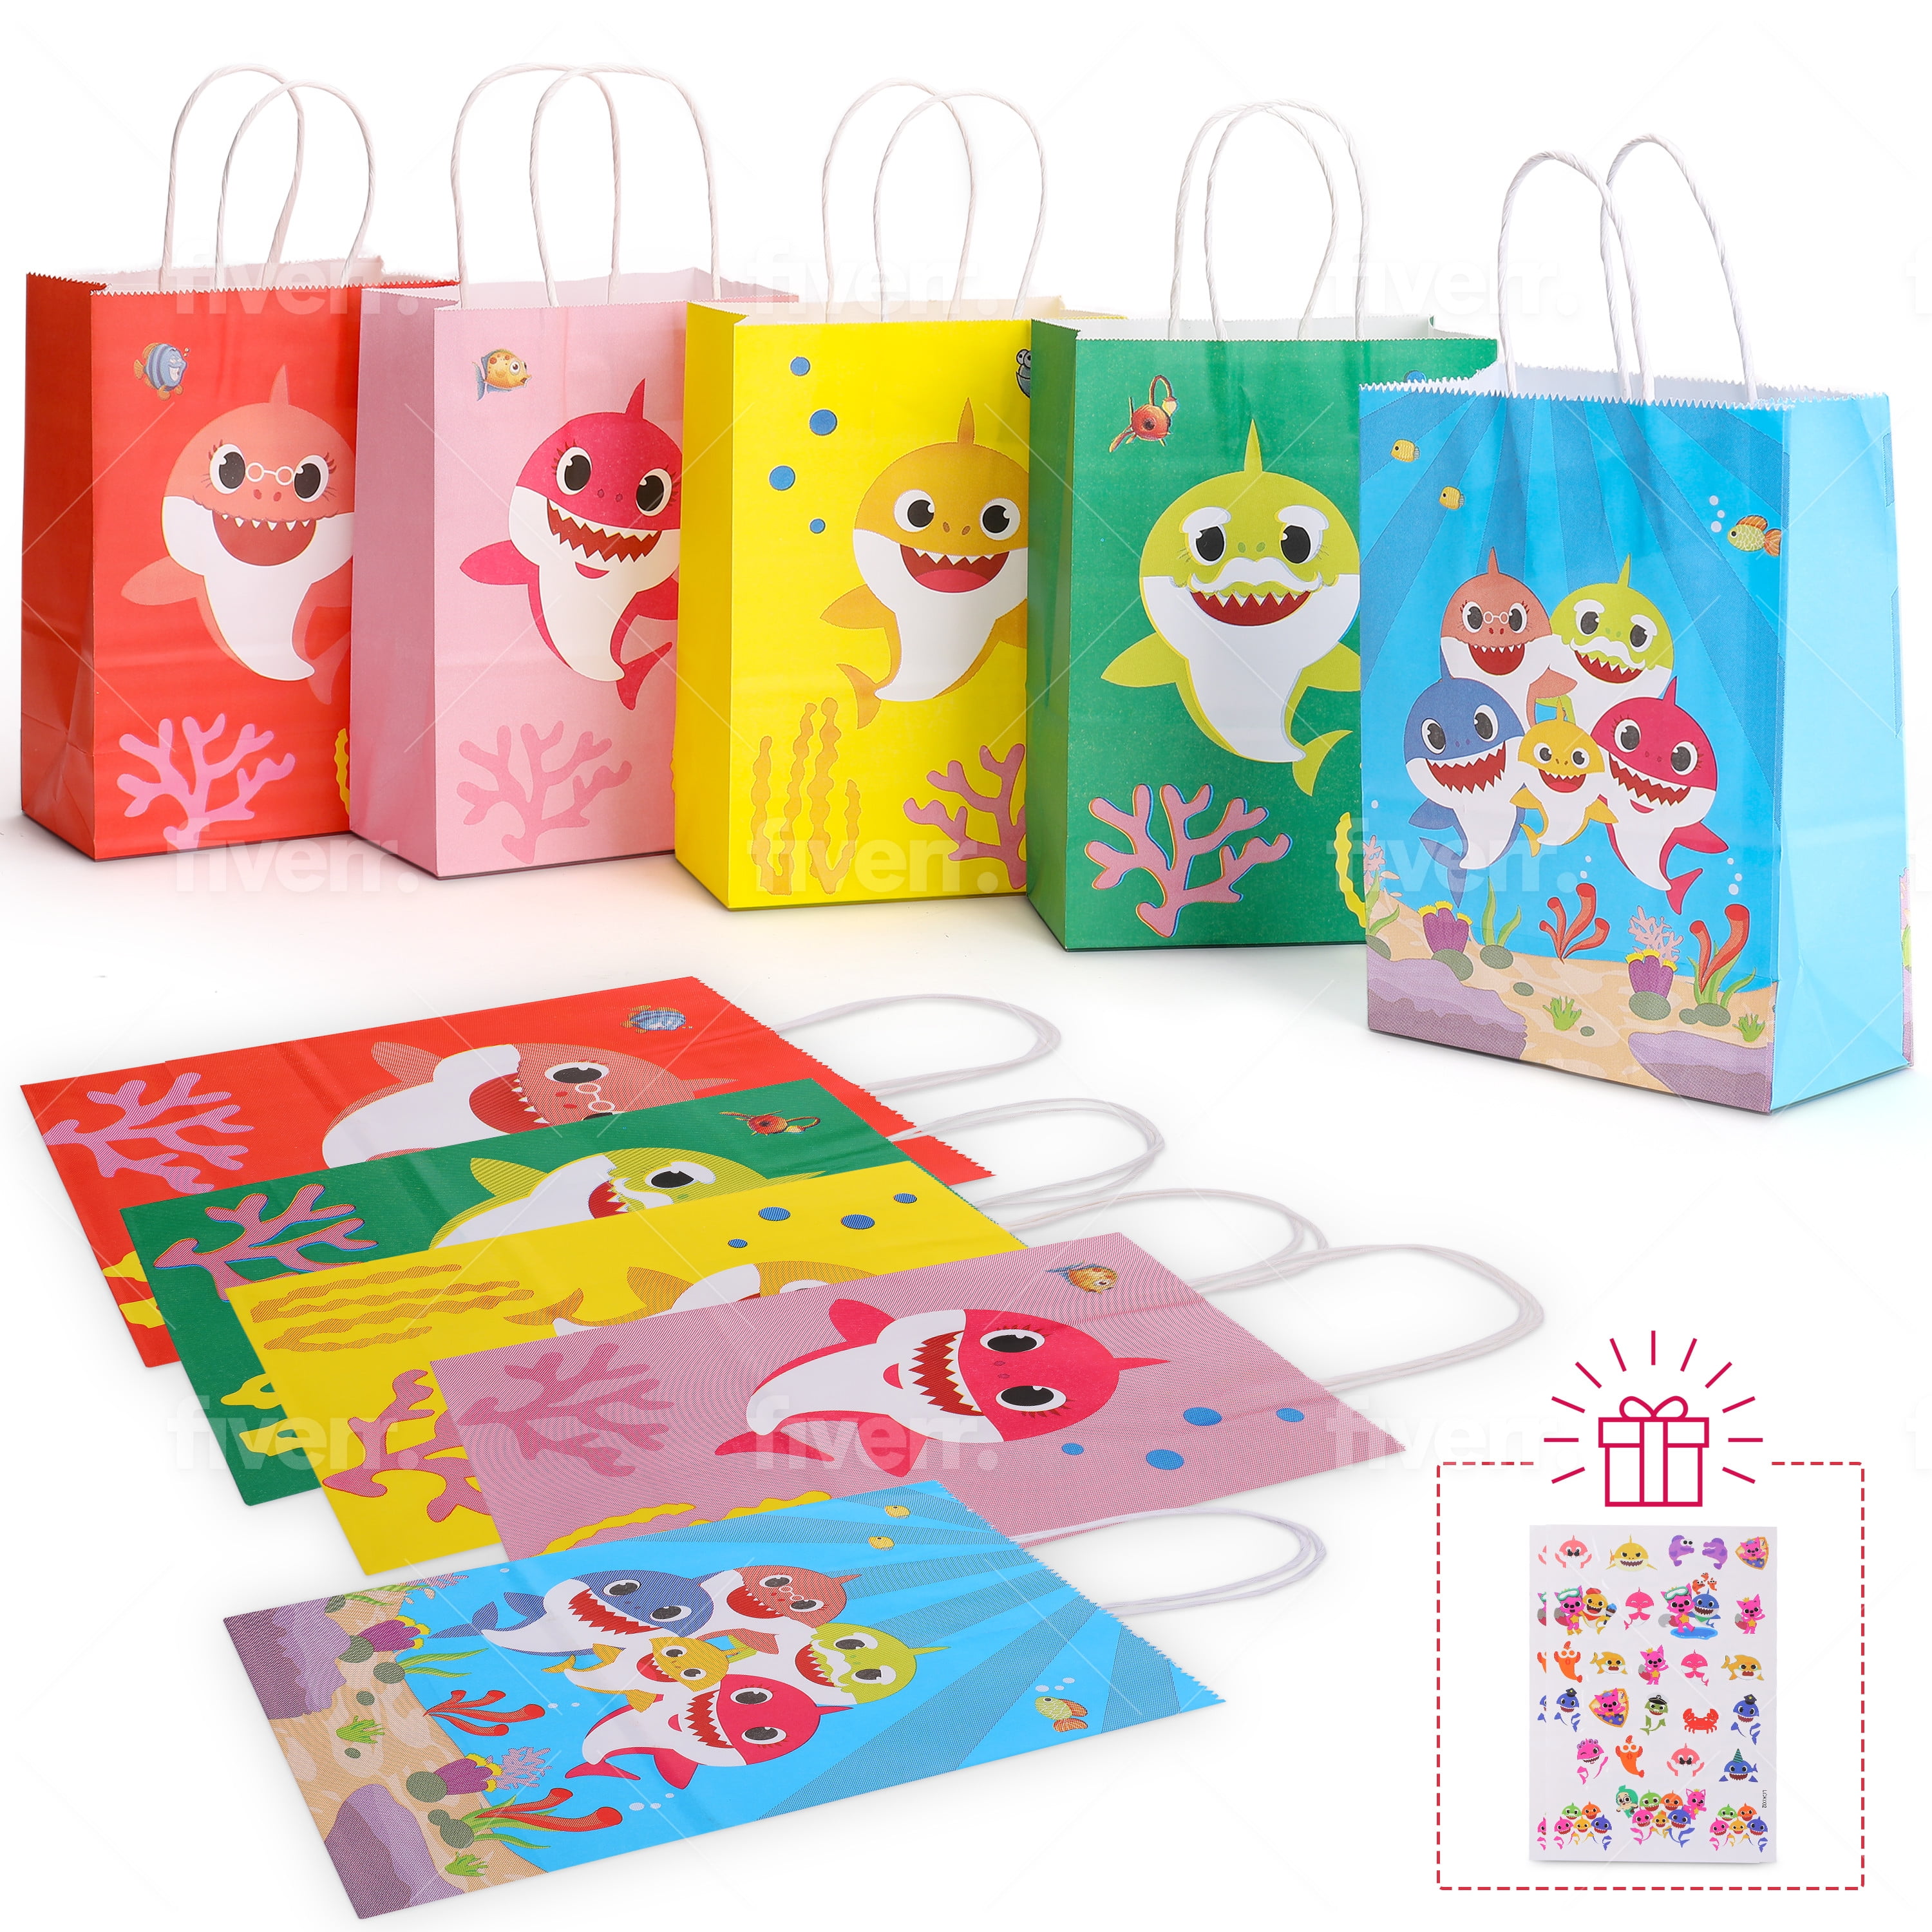 Kawaii cute bird lover themed gift bag with stickers keychain goodies and stationery